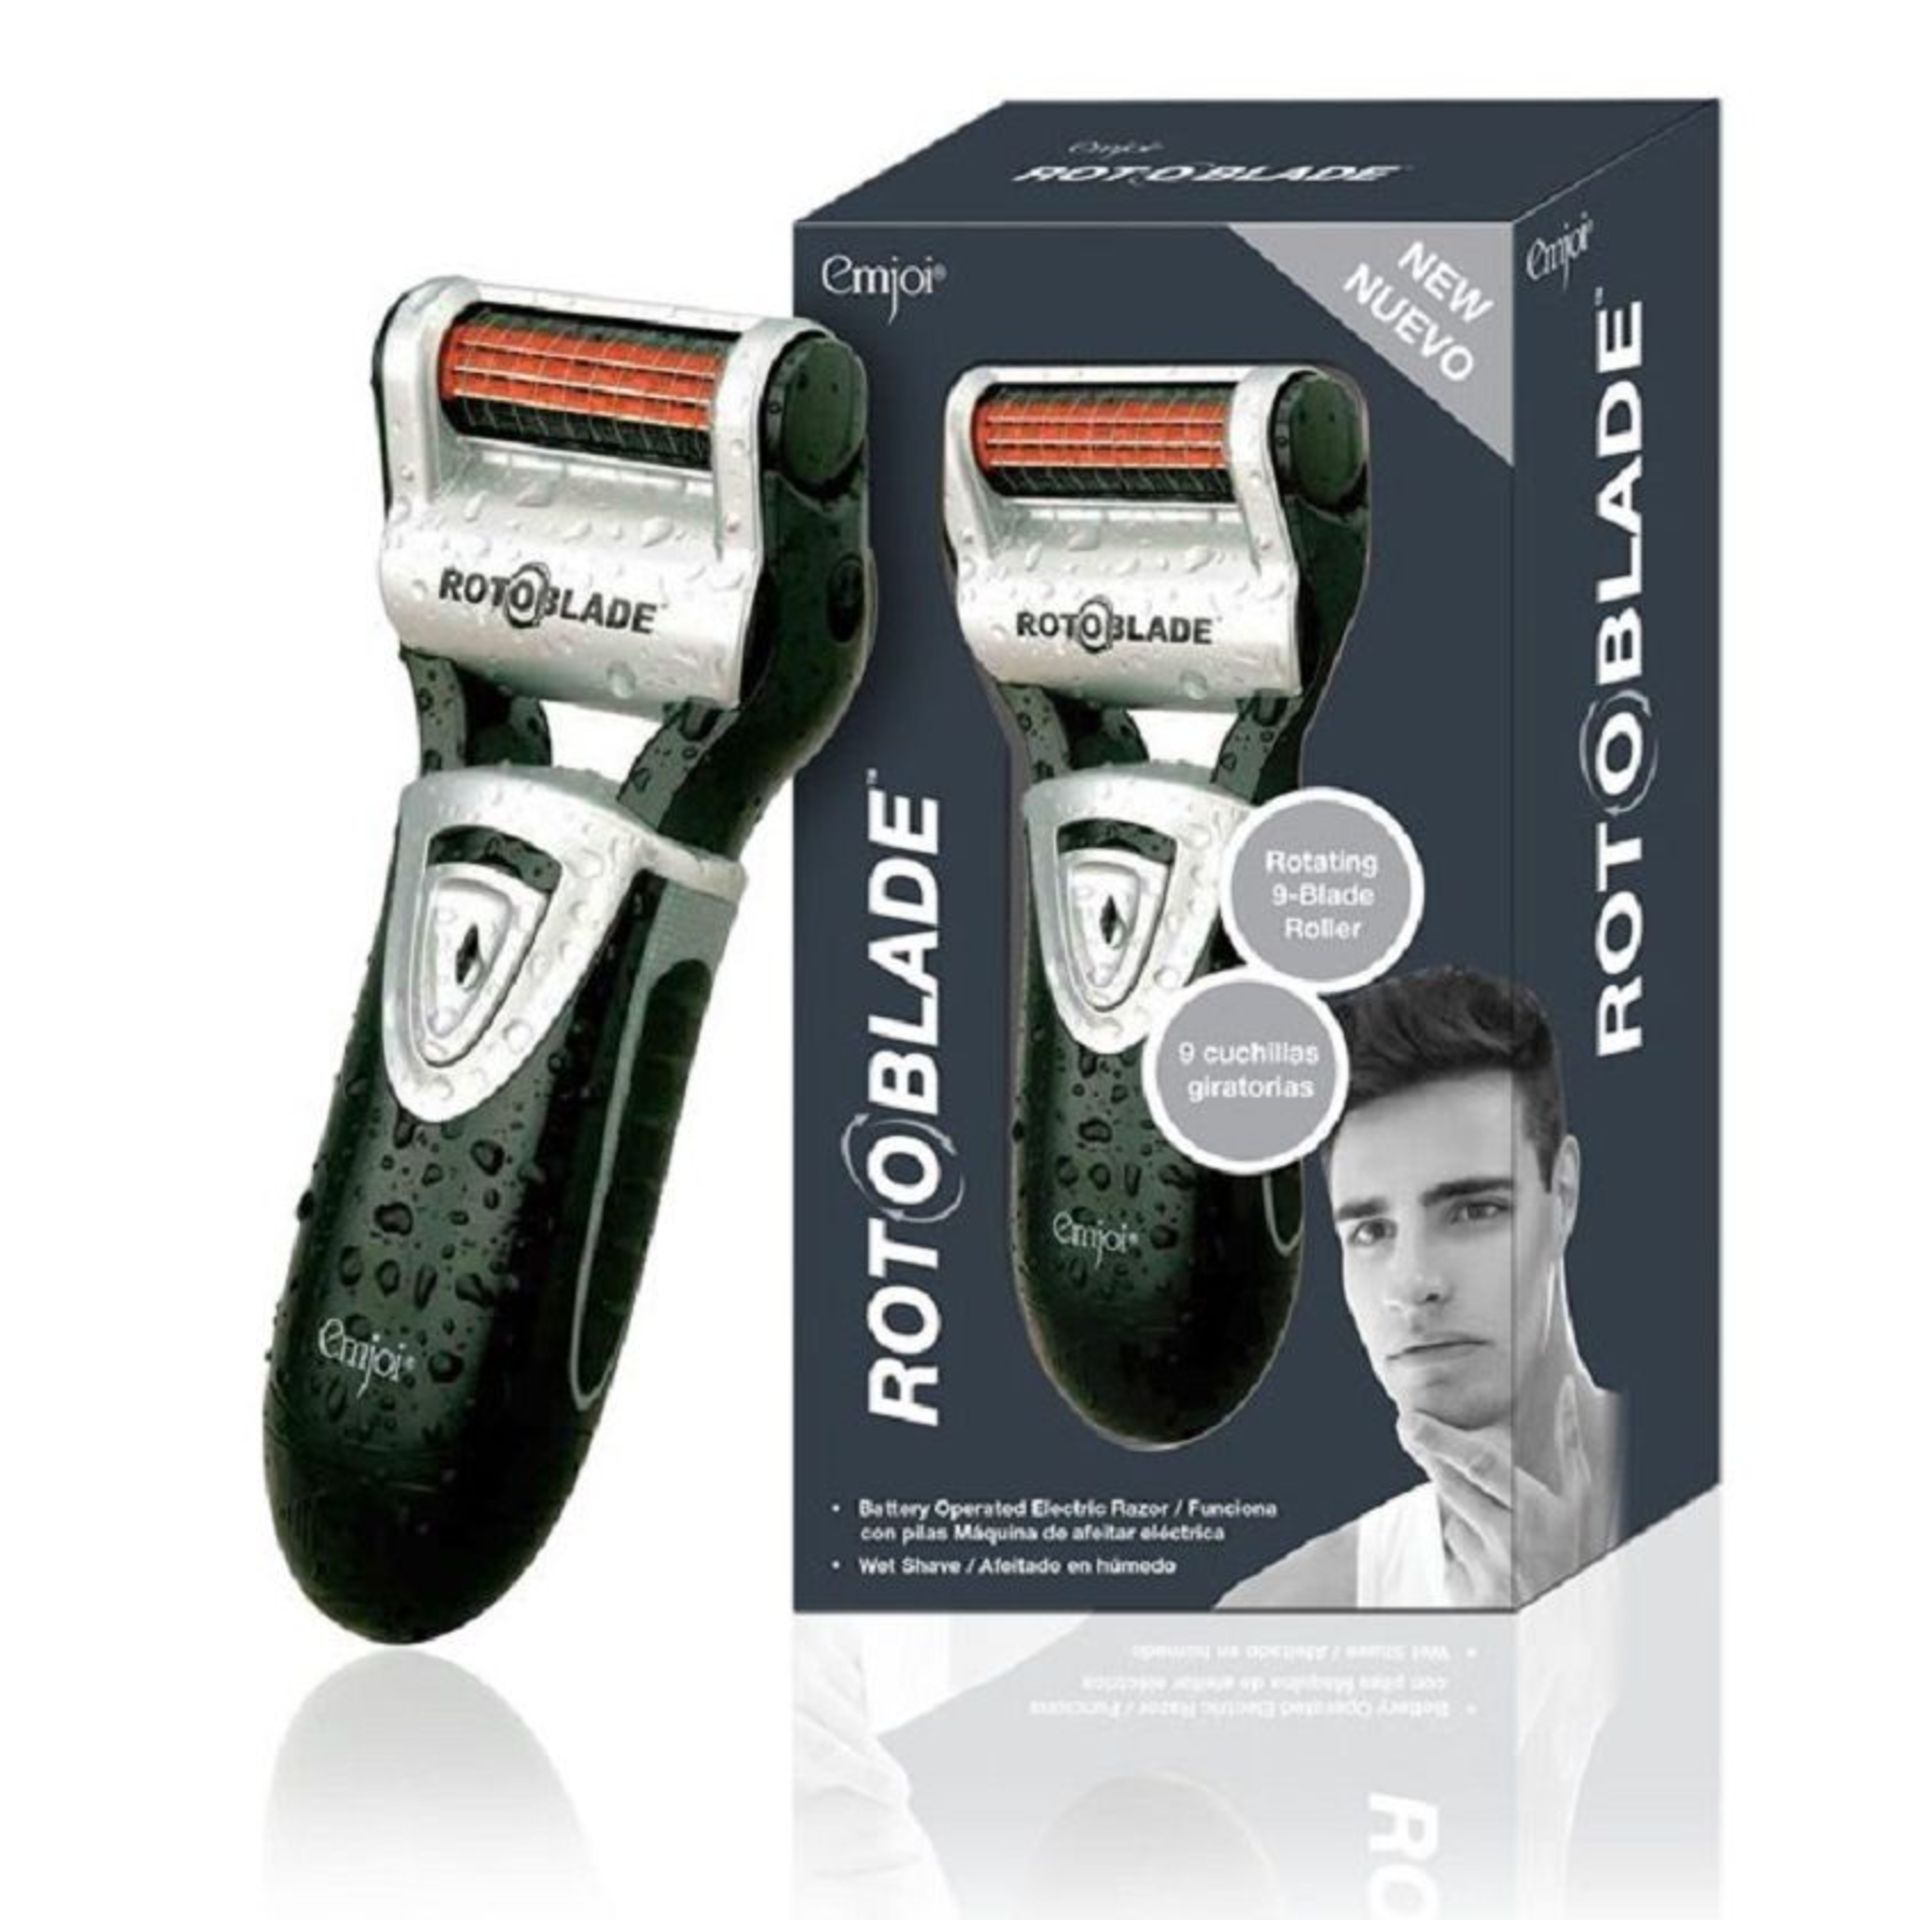 V Brand New RotoBladed Waterproof Electric Razor 9 Rotating Blades at 30RPM CLoser Safer Faster